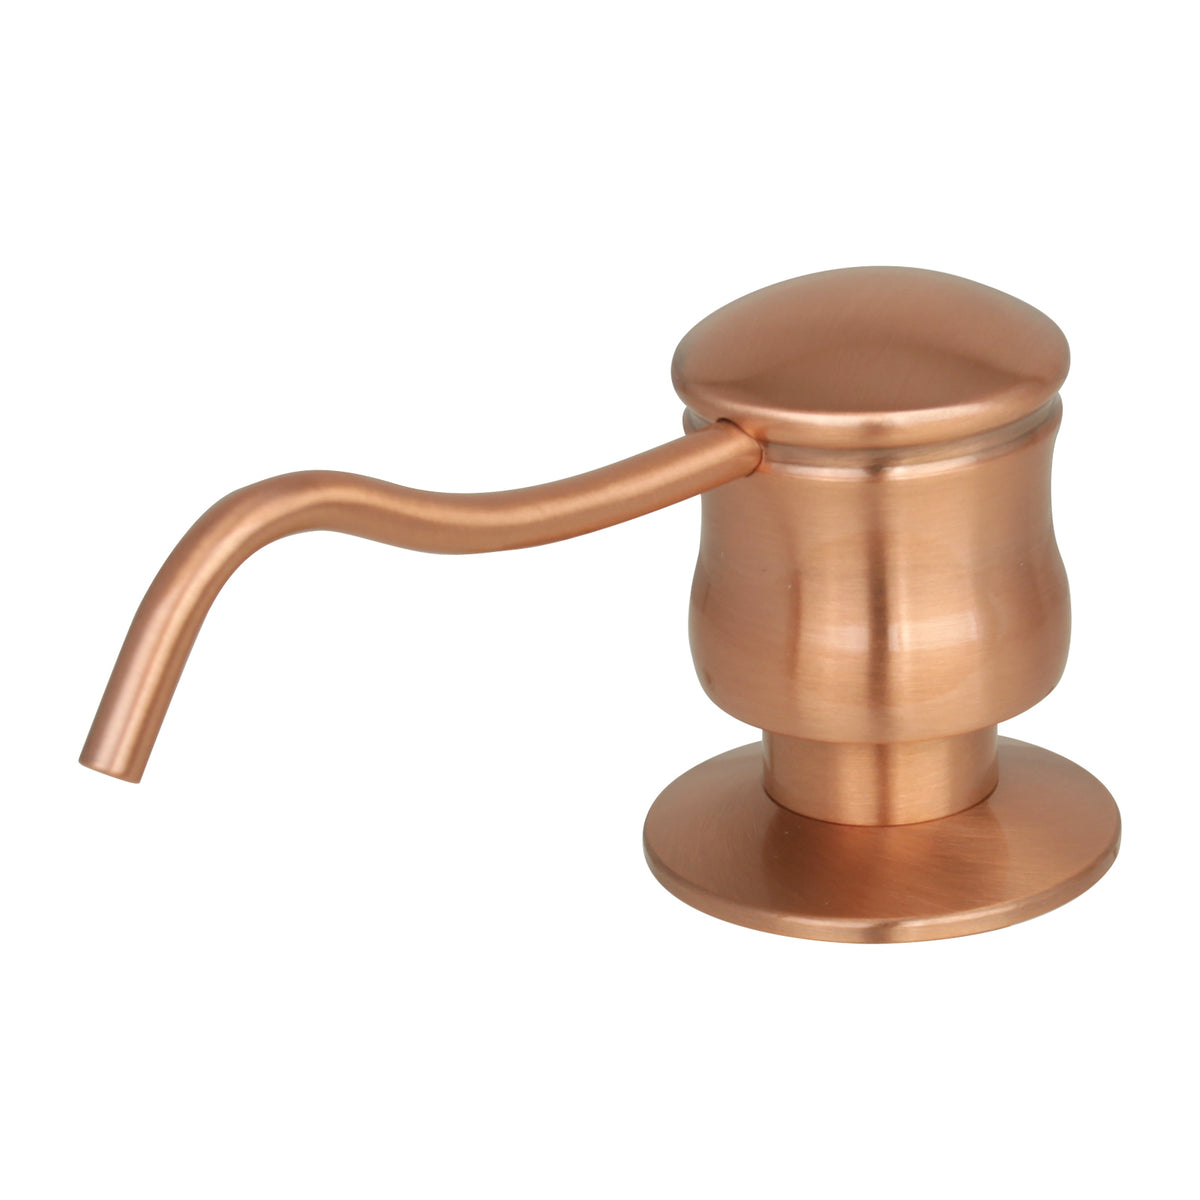 Built in Copper Soap Dispenser Refill from Top with 17 OZ Bottle - AK81006C